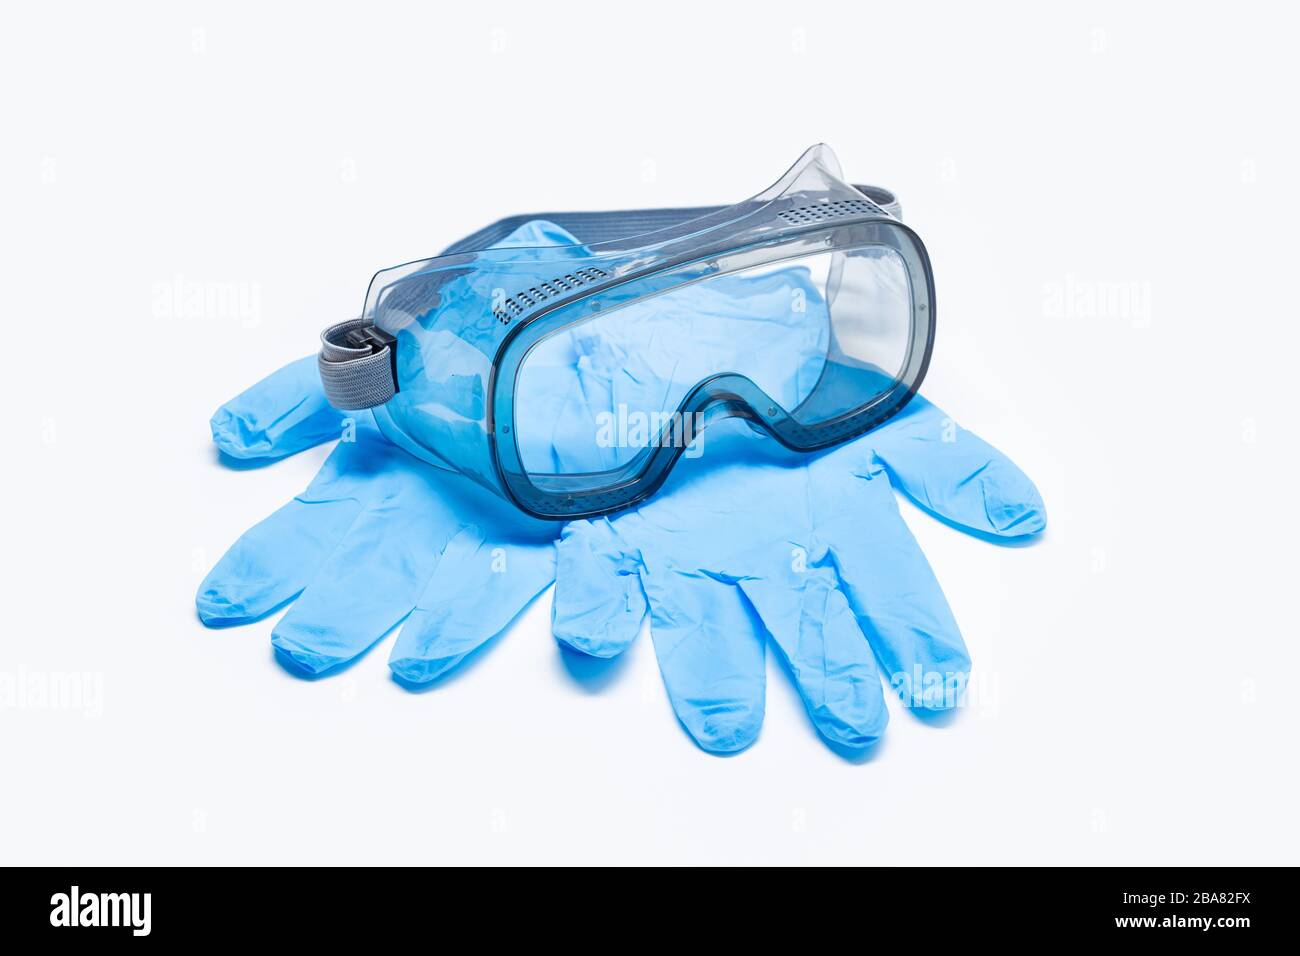 Safety equipment or Protective suit to fight to Coronavirus COVID-19 virus outbreak. Safety glasses and protective glove isolated on white background Stock Photo